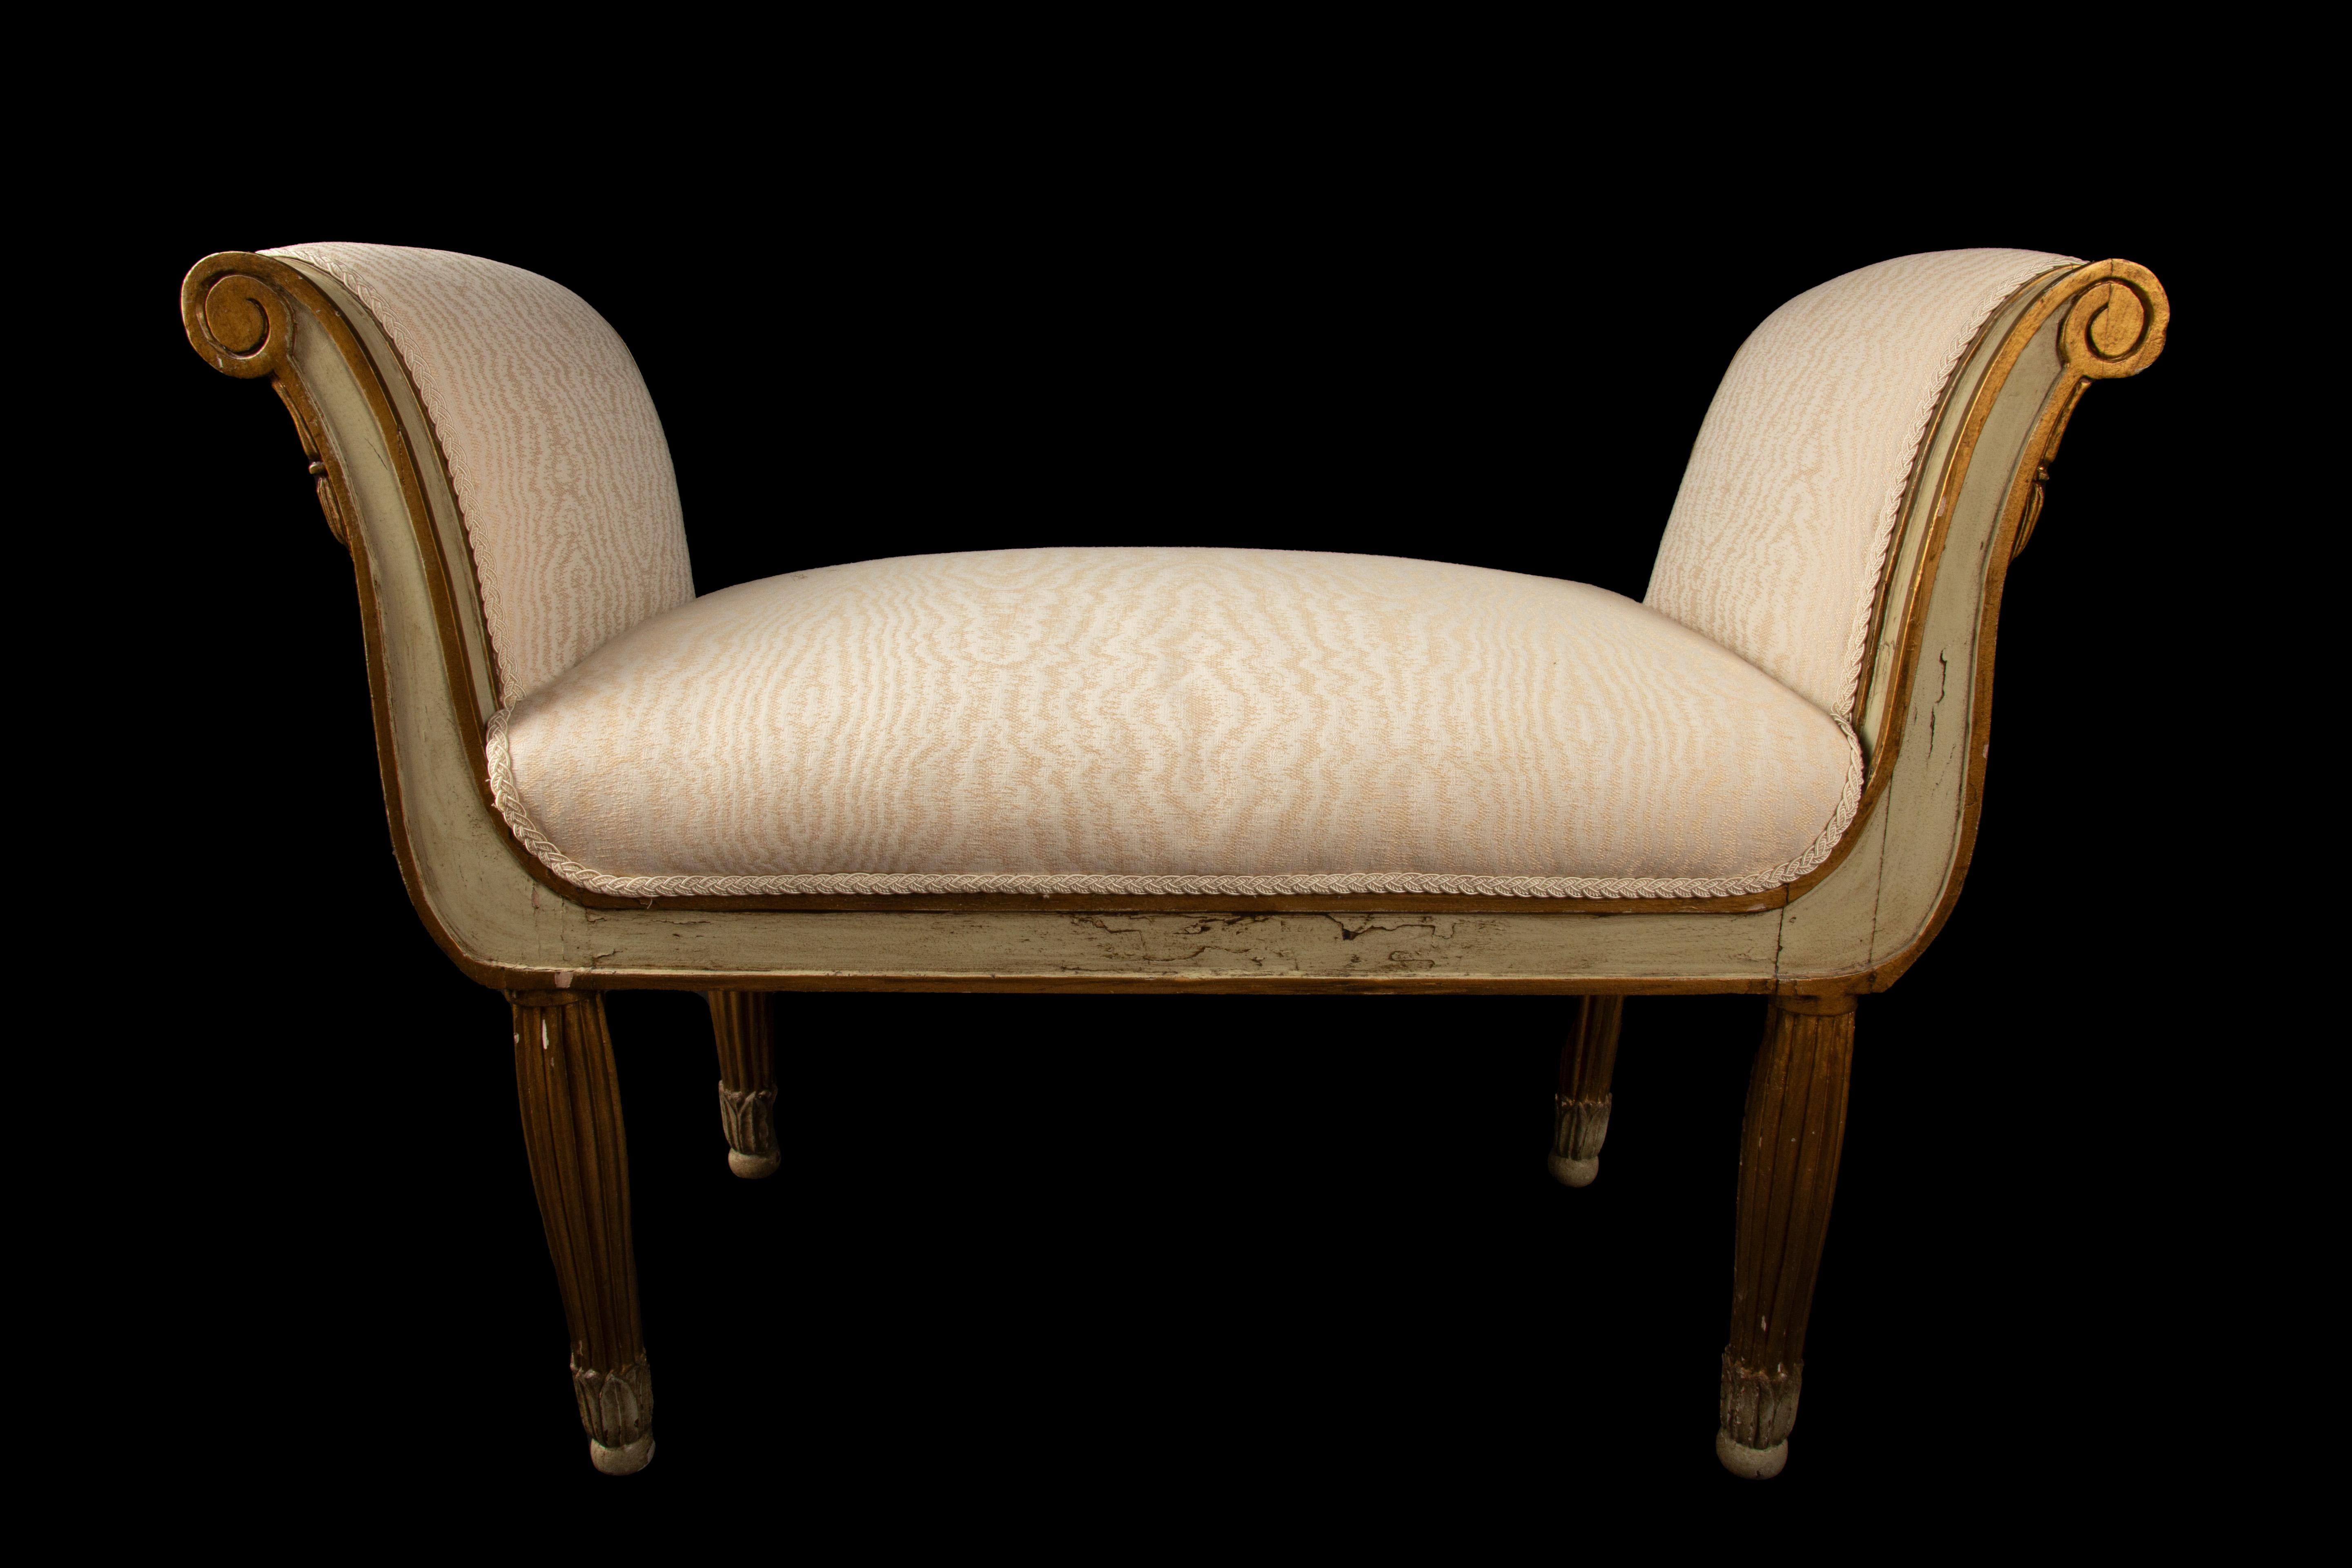 Wood Sage Elegance: 1920s Italian Bench with Gilt Accents For Sale